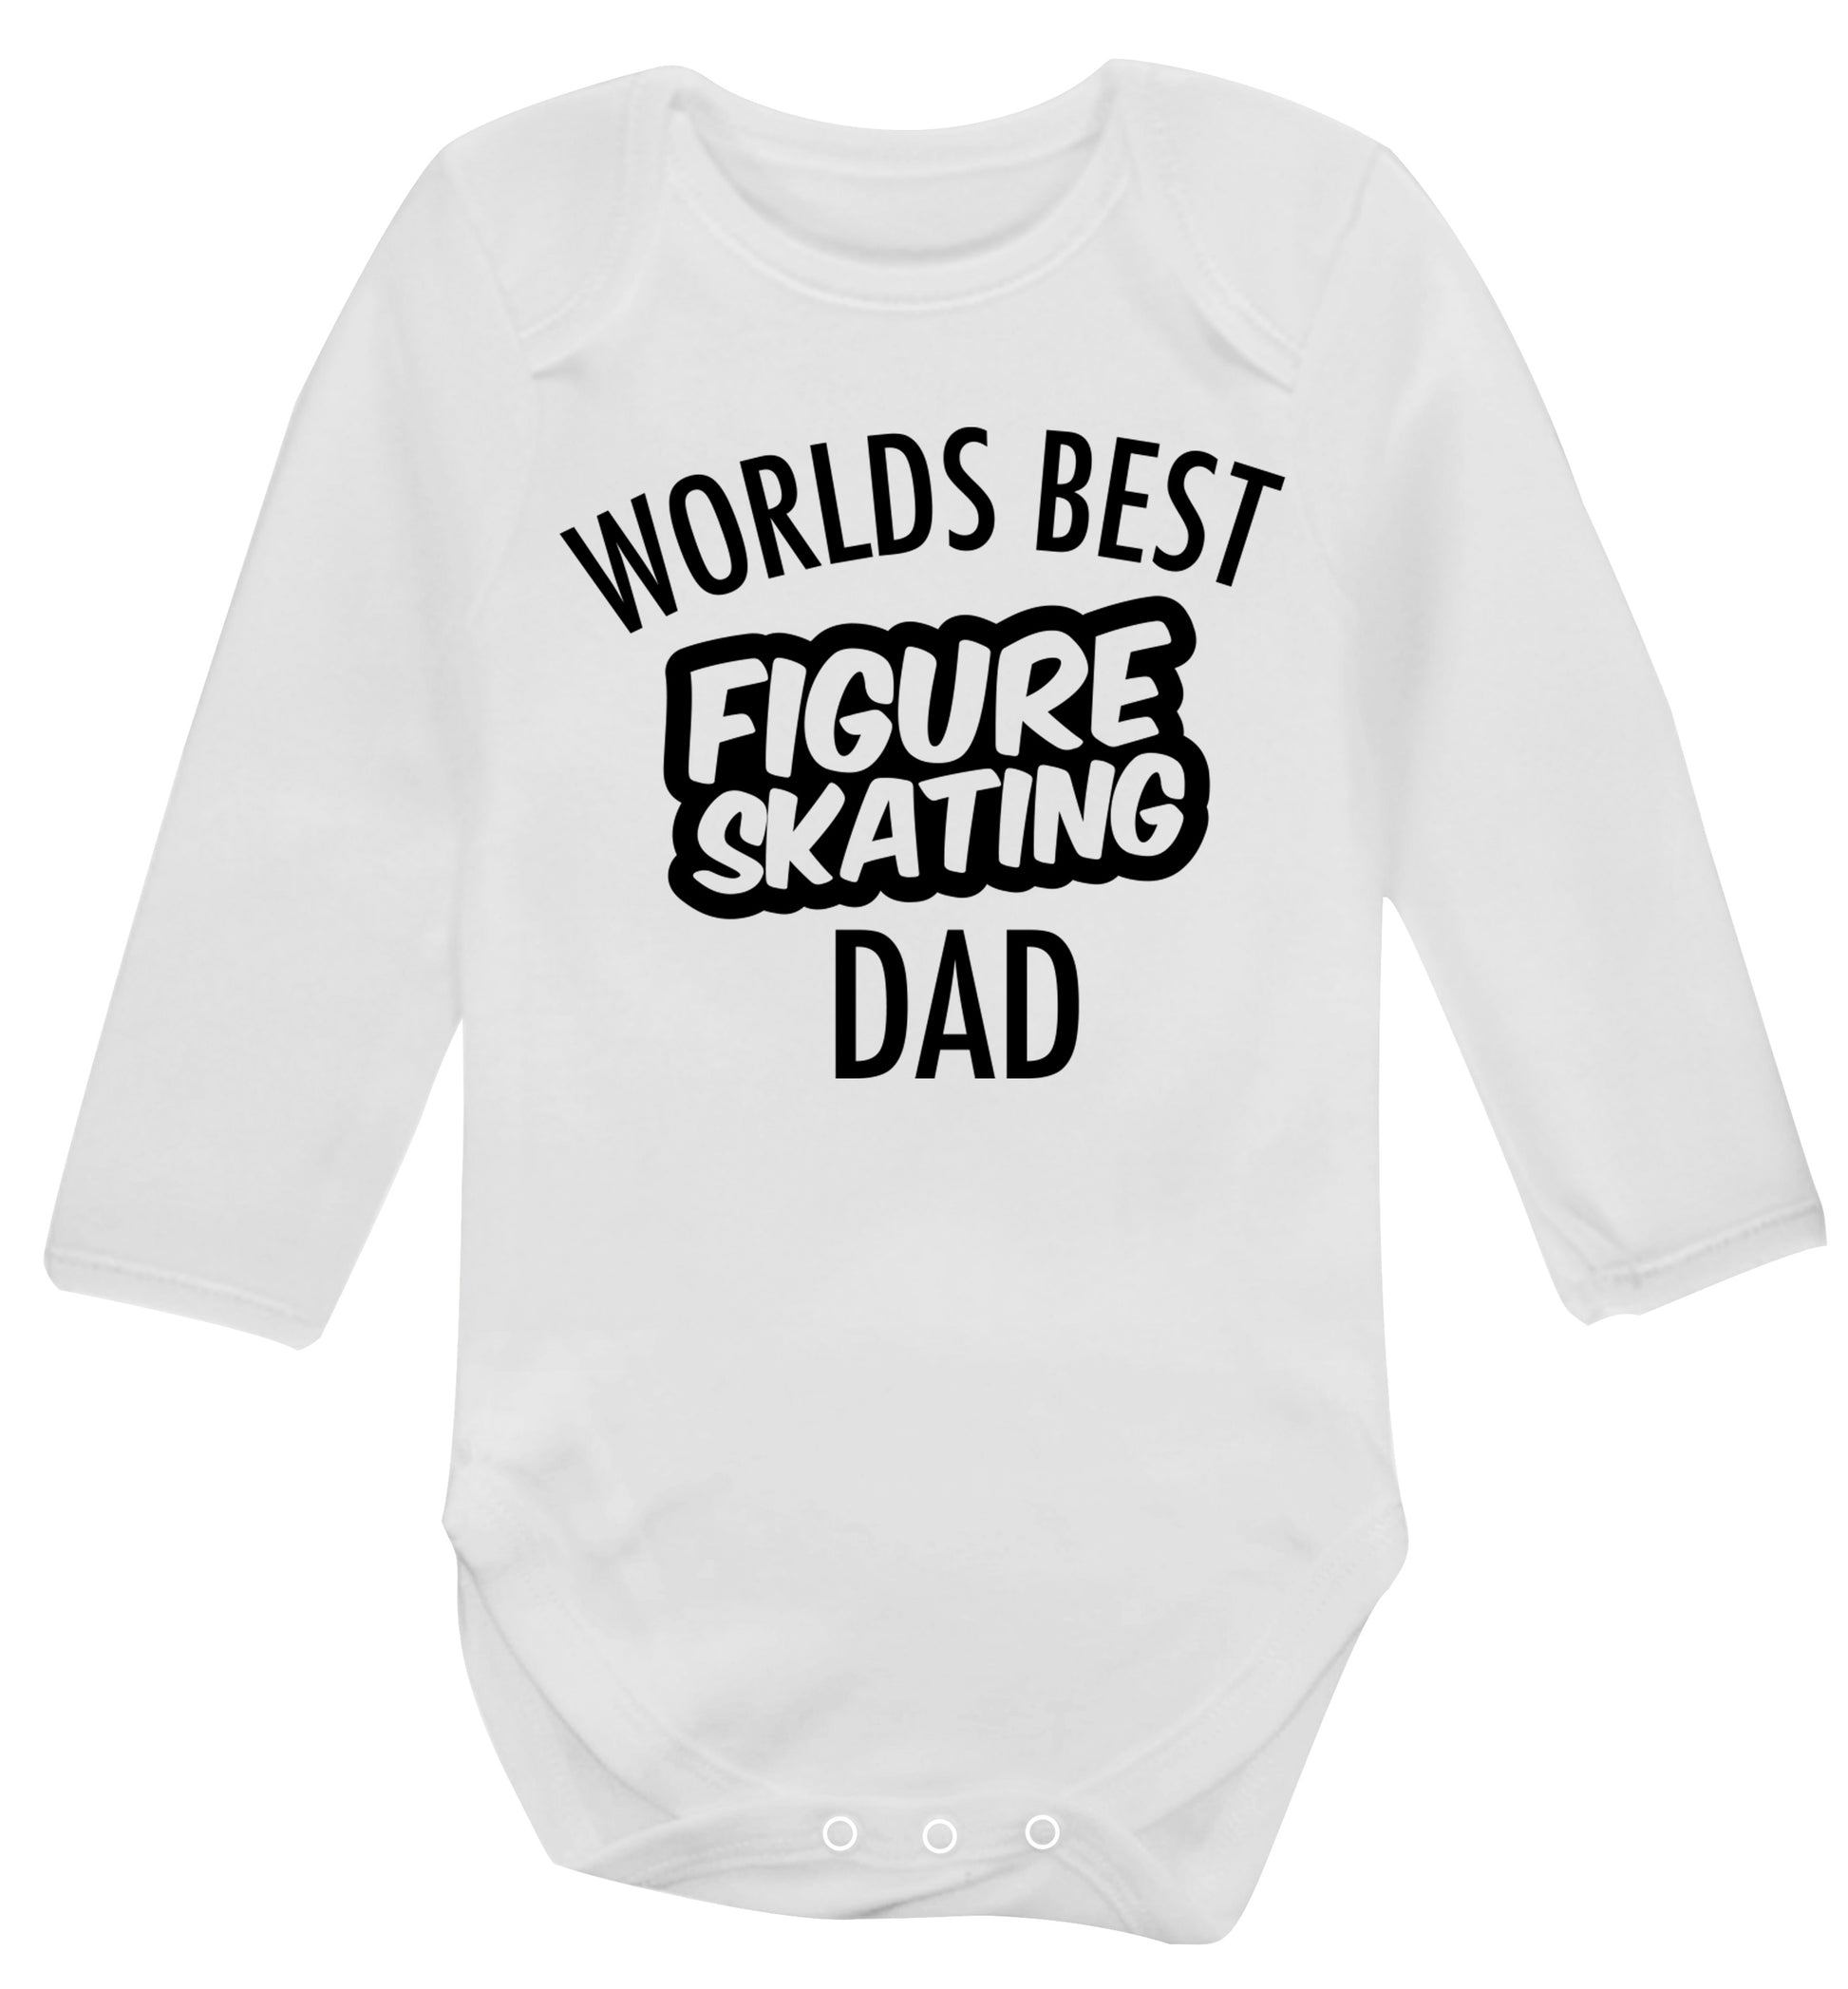 Worlds best figure skating dad Baby Vest long sleeved white 6-12 months